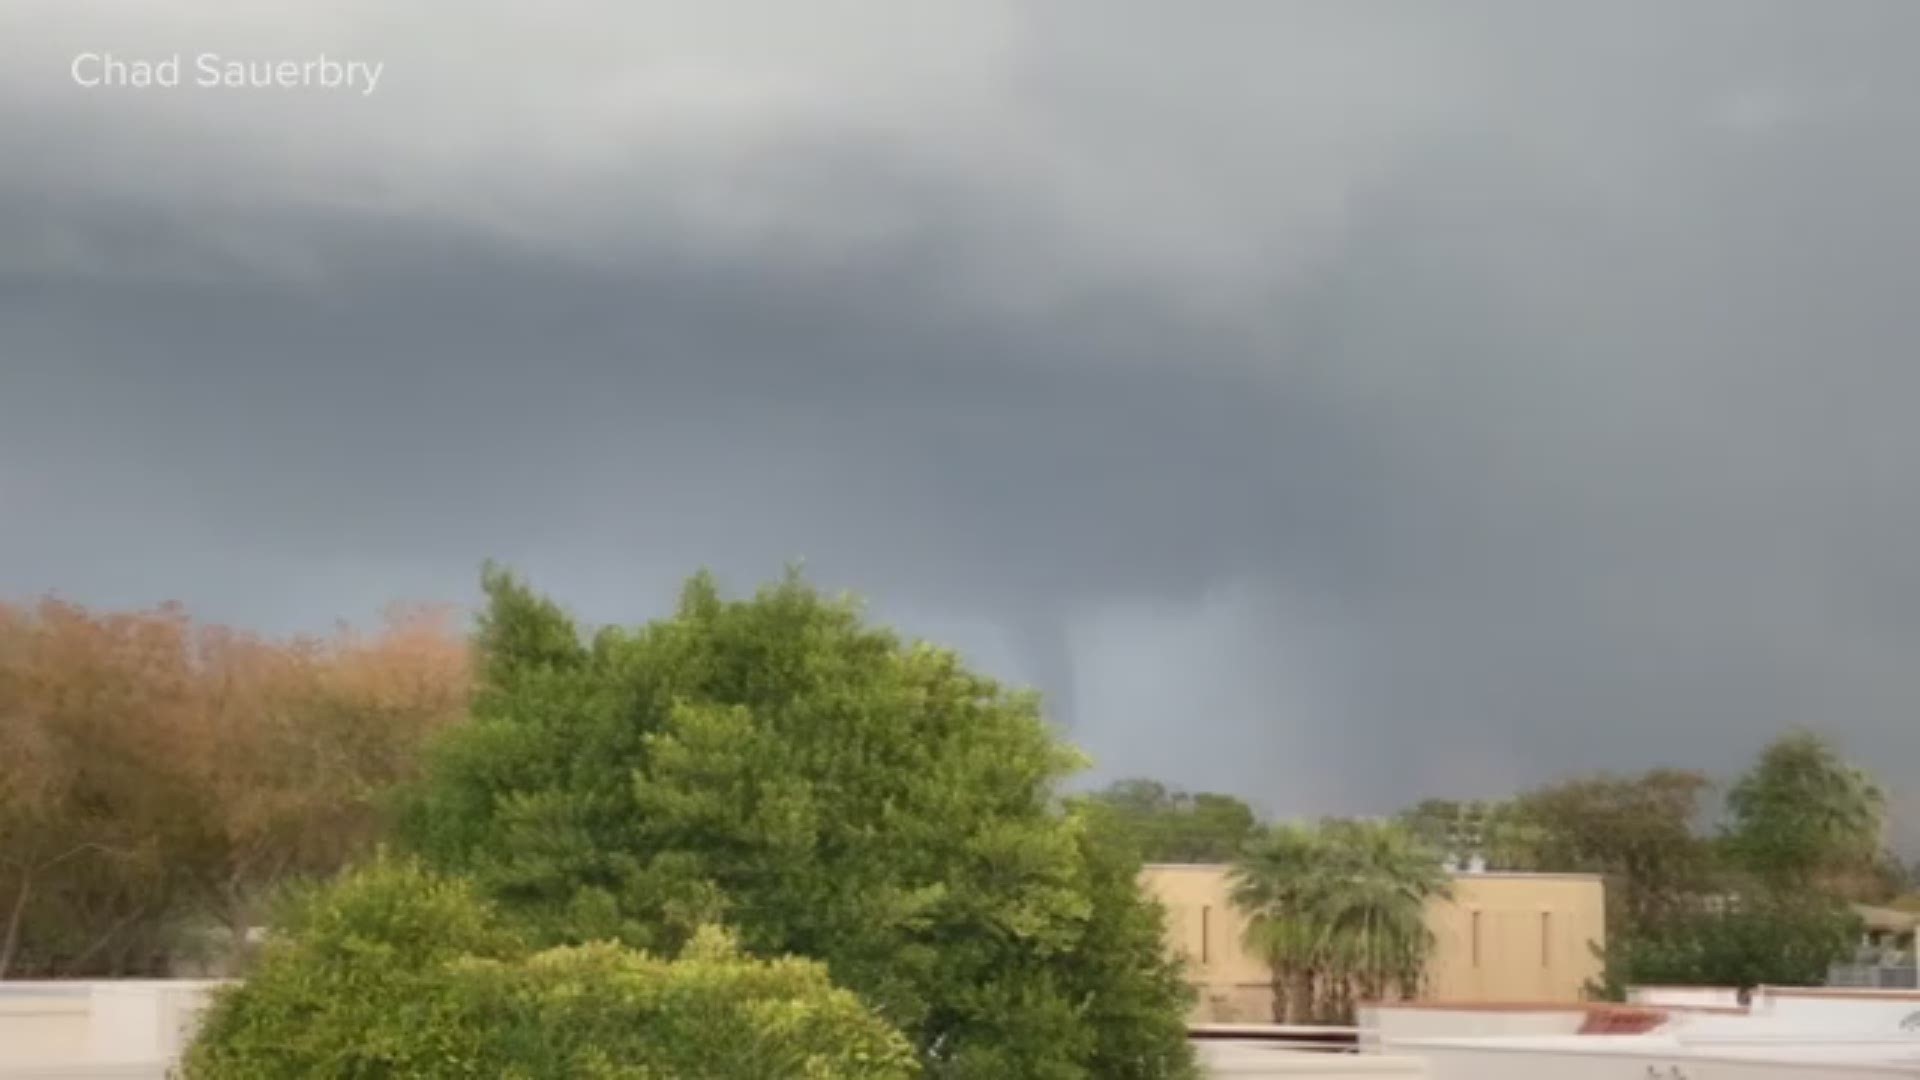 Video by Chad Sauerbry shows a funnel cloud seen from 26th Street and Thomas Road looking to the northeast.